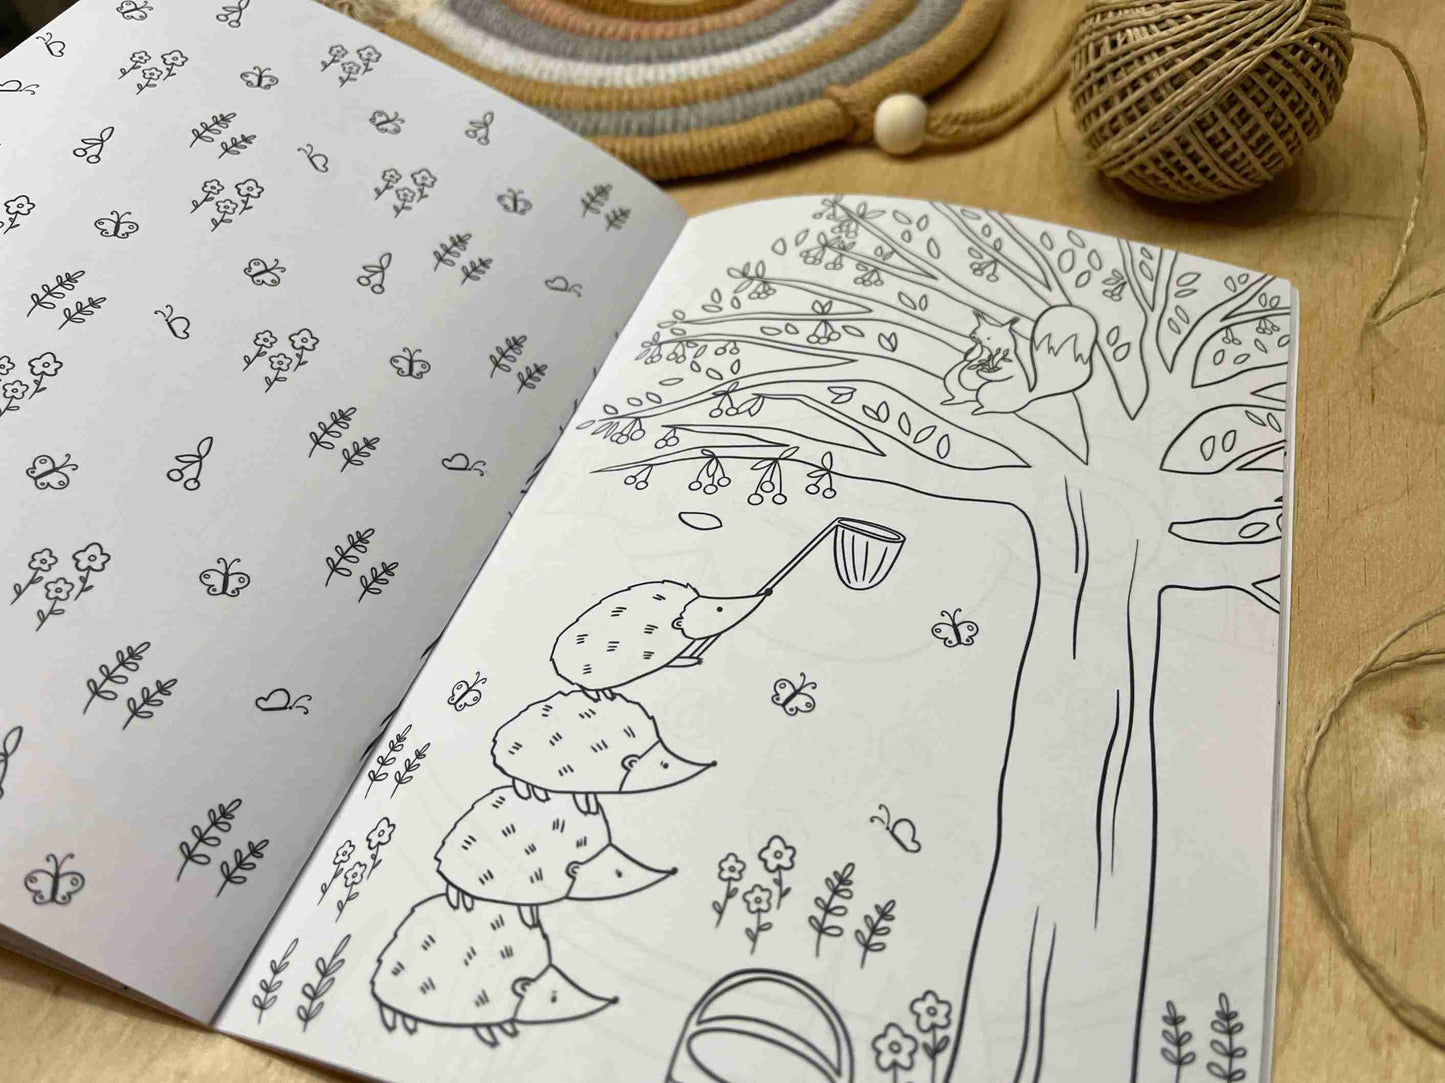 Four seasons coloring book (32 pages)